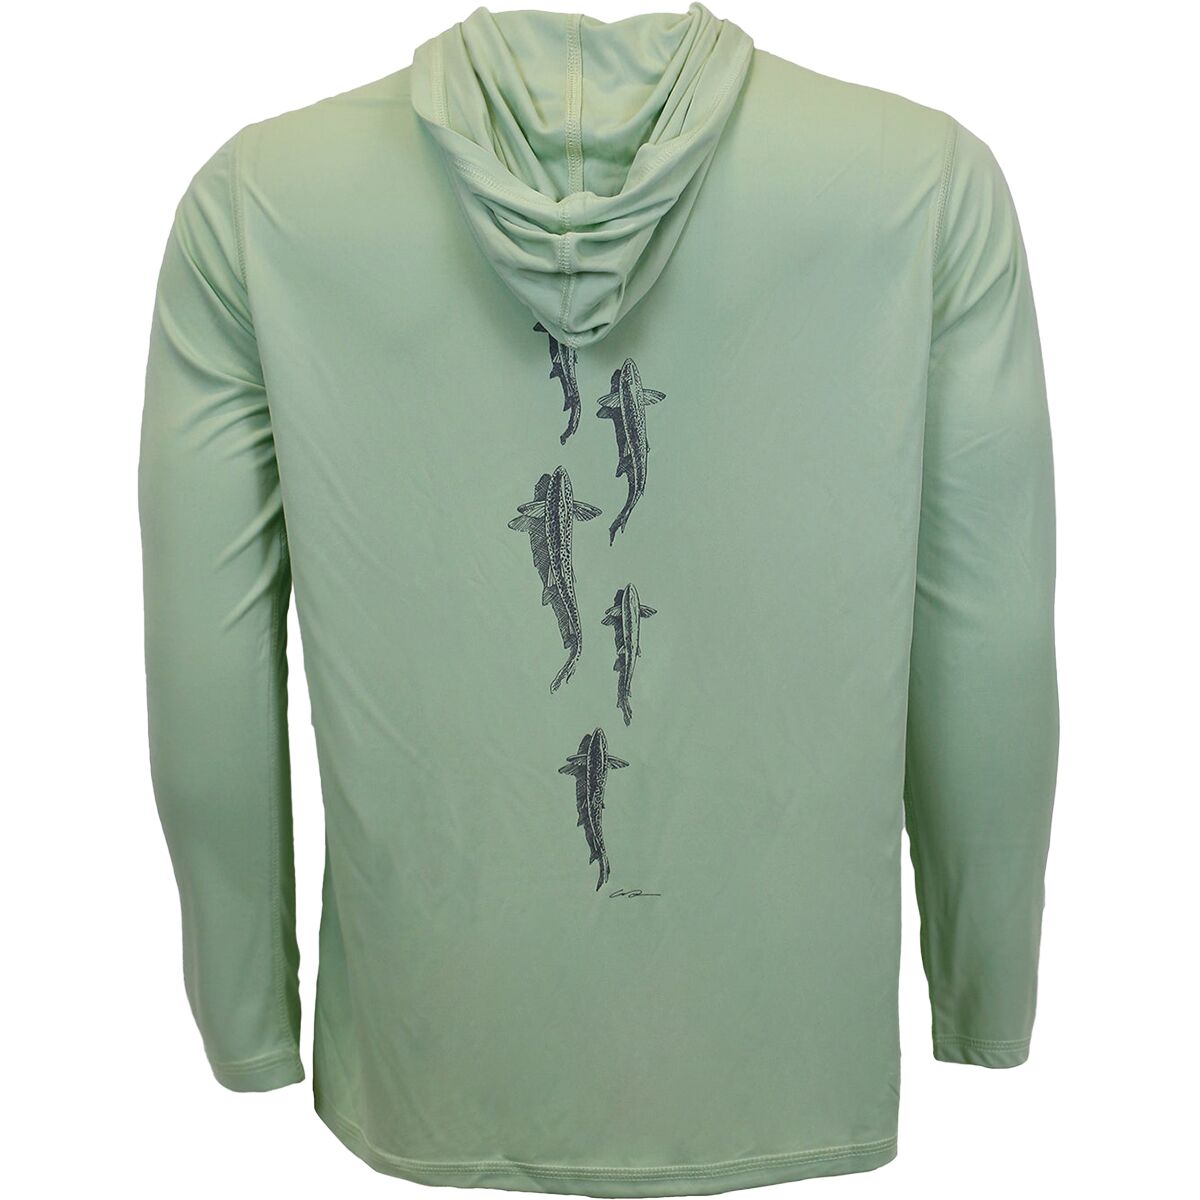 Rep Your Water Trout Country Spine Sun Hoodie - Men's